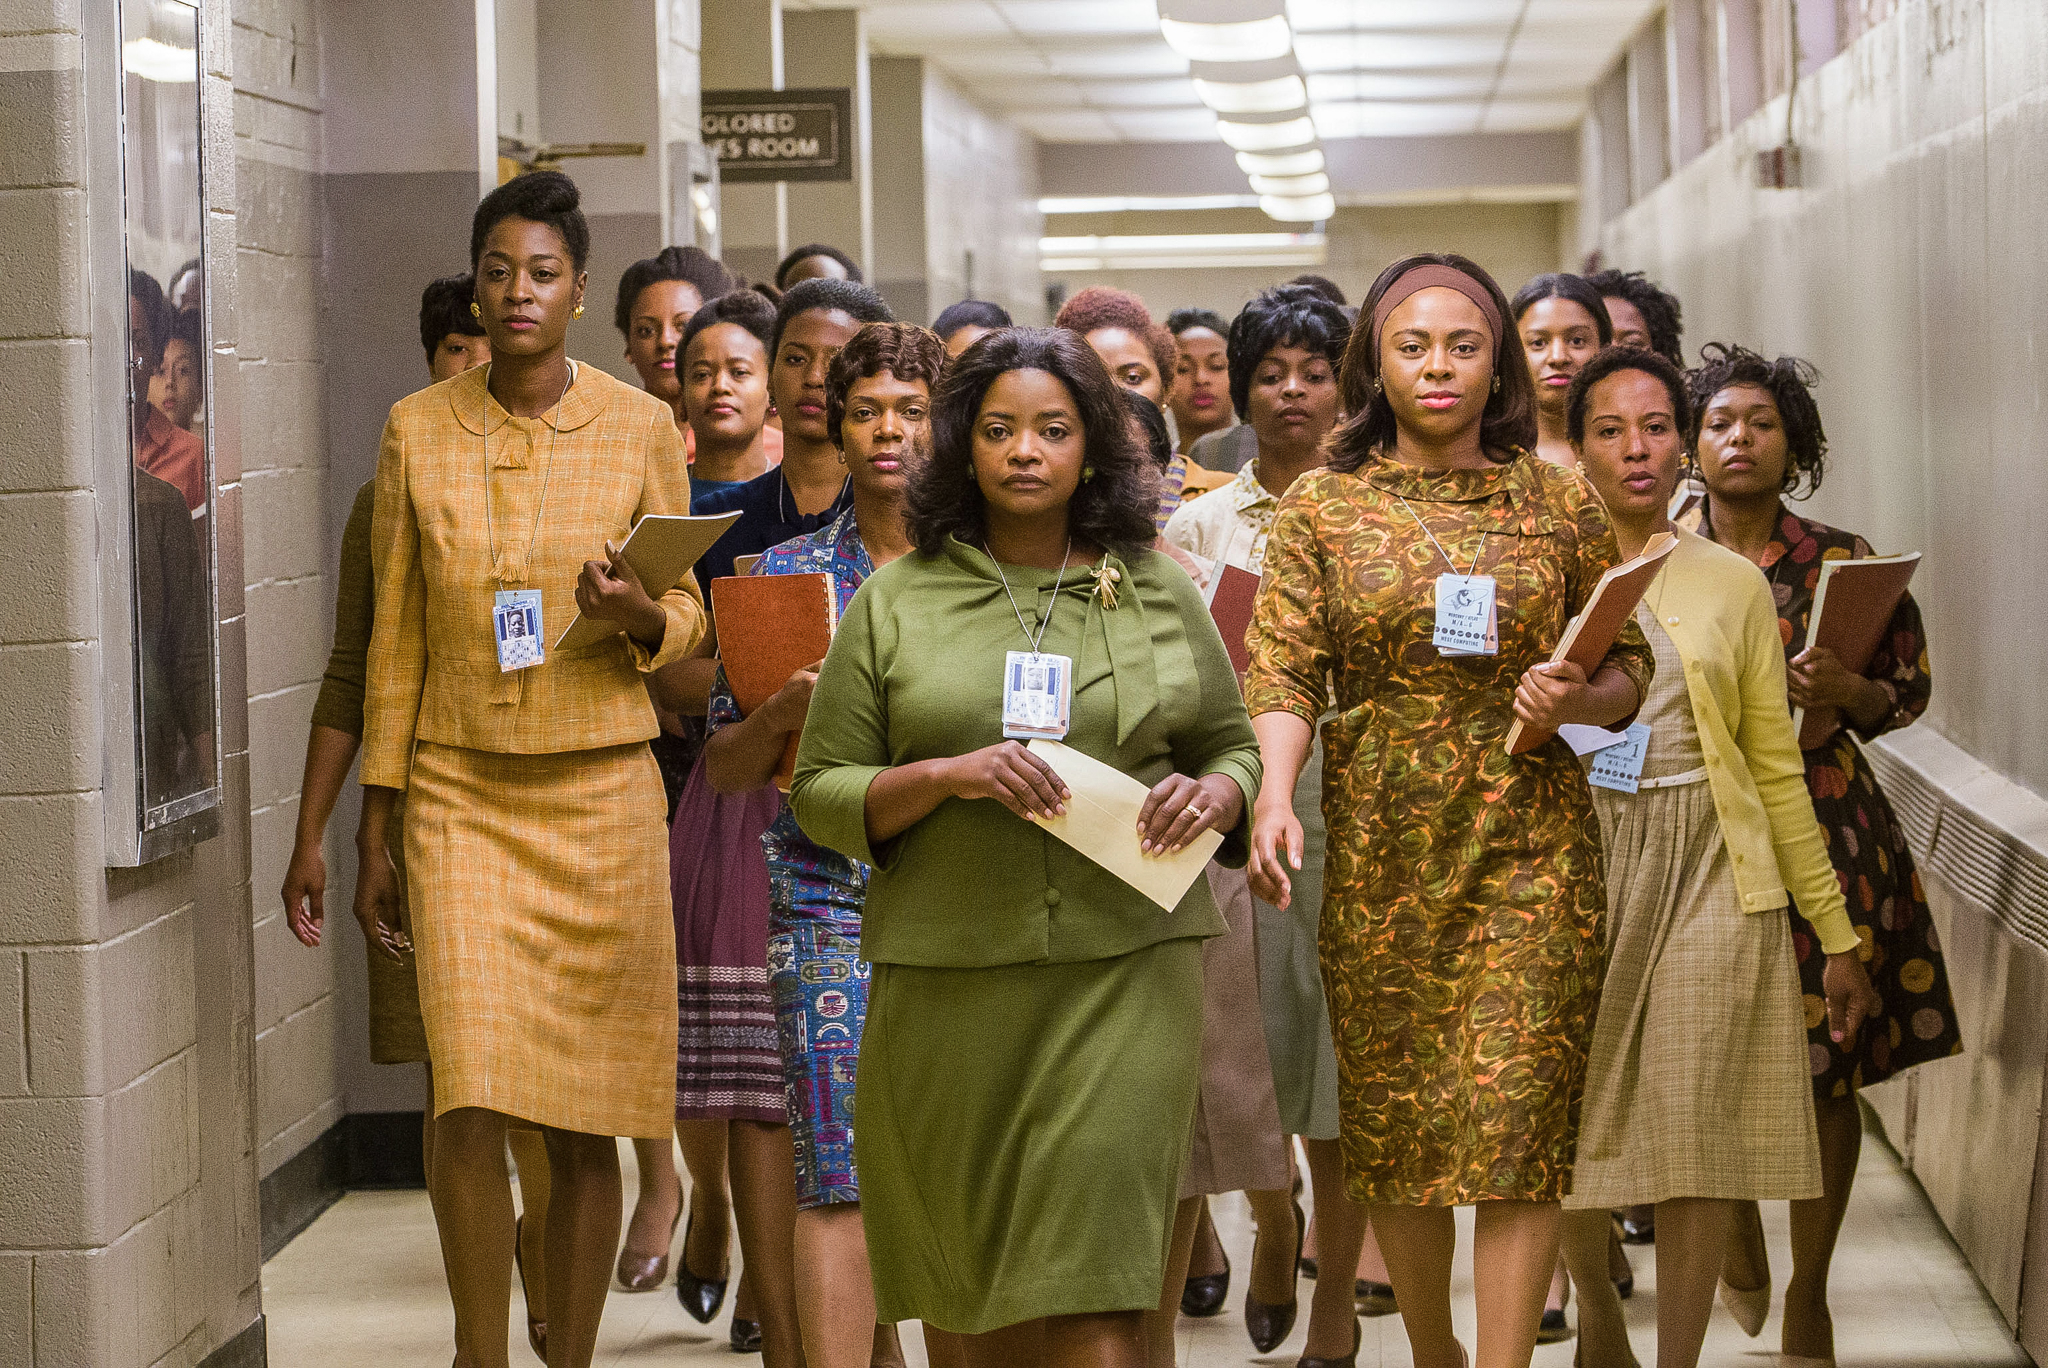 Still frame from the film 'Hidden Figures': A group of Black female scientists walk confidently through the halls of NASA.